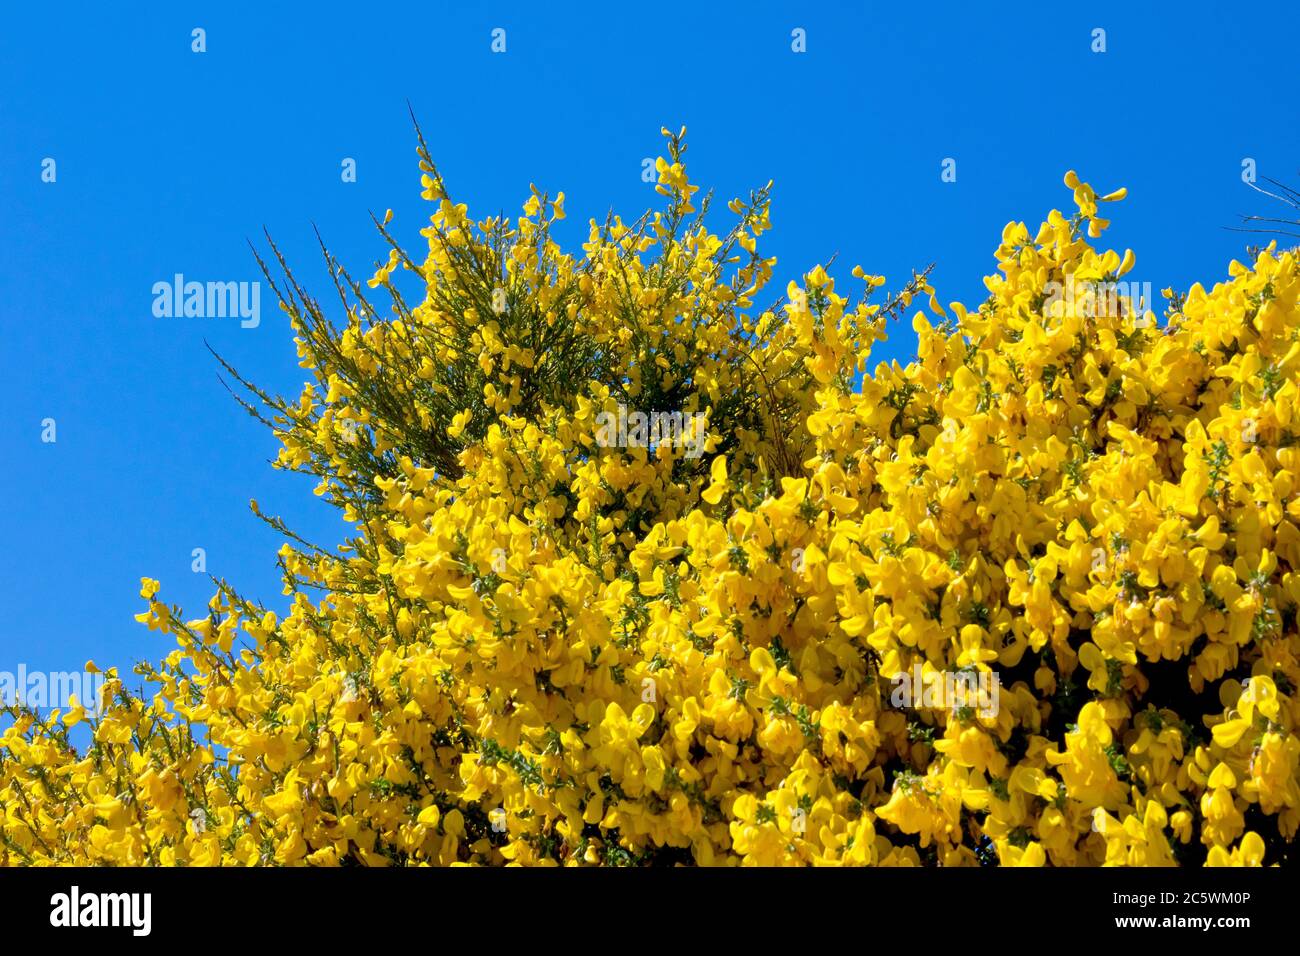 Broom (cytisus scoparius), a shot of the shrub in full flower against a cloudless, clear blue spring sky. Stock Photo